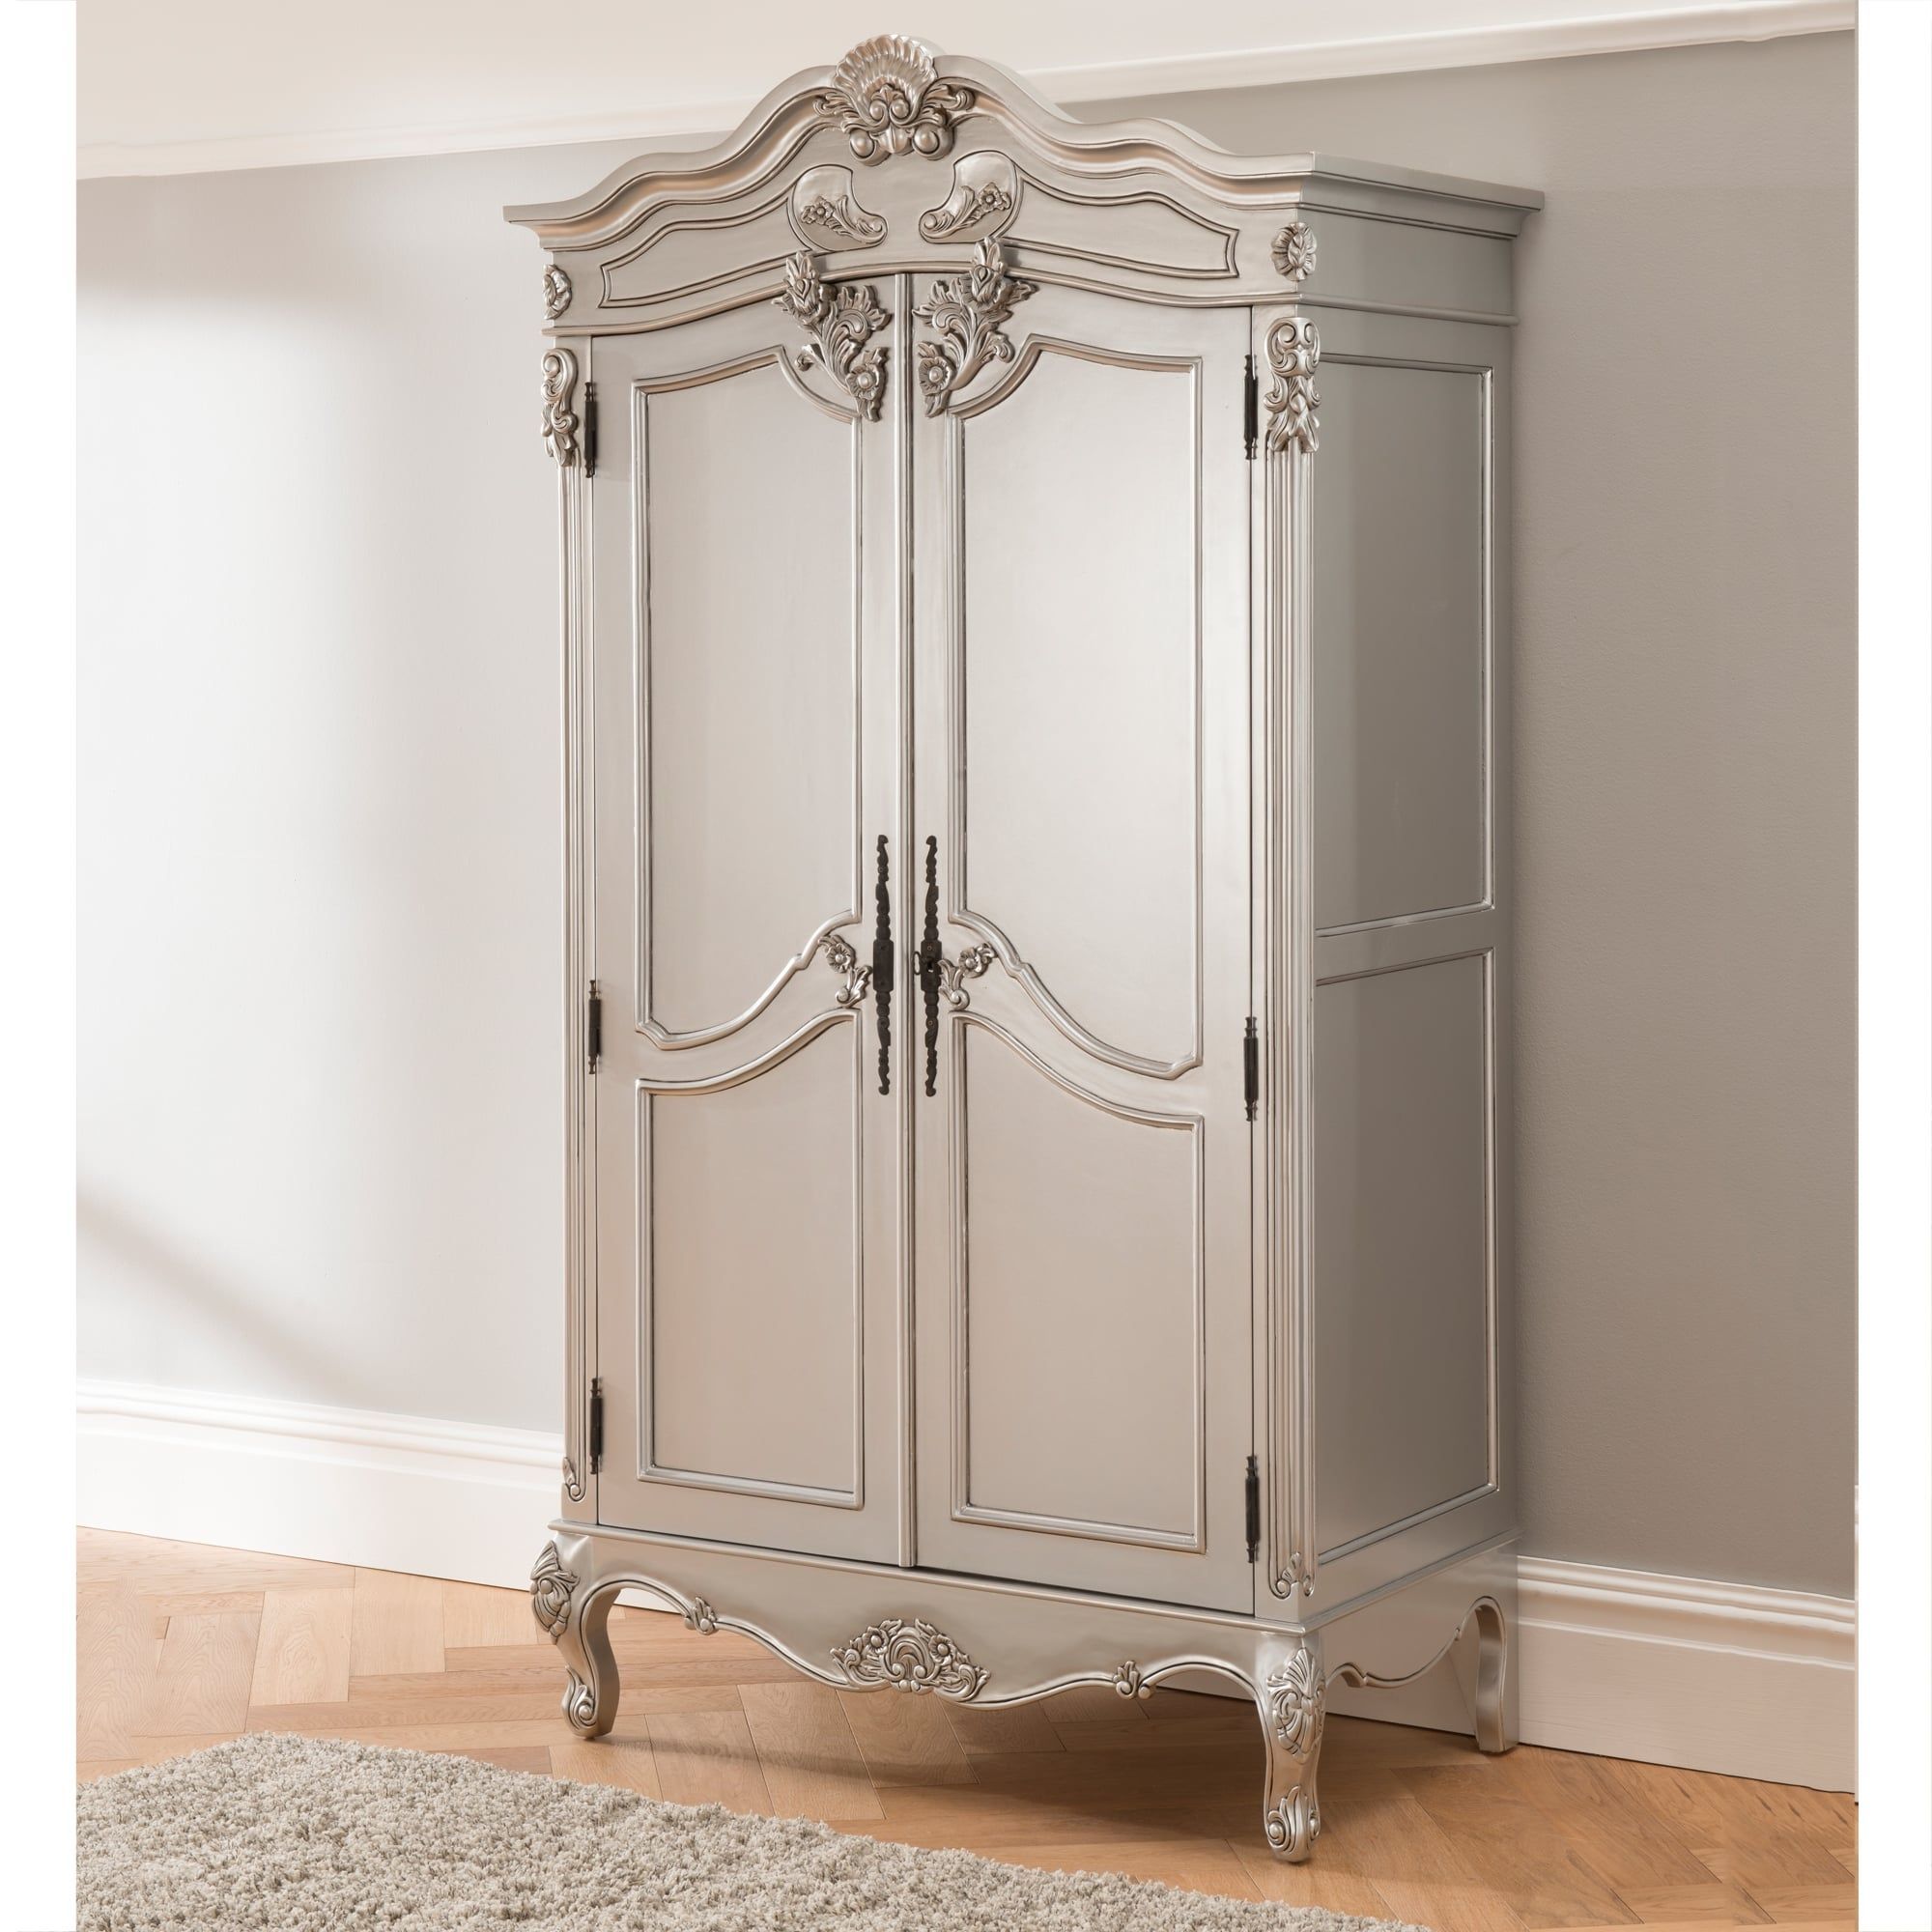 Baroque Antique French Style Wardrobe | Shabby Chic Wardrobe, French  Antiques, French Furniture Bedroom Intended For Shabby Chic Wardrobes (View 13 of 15)